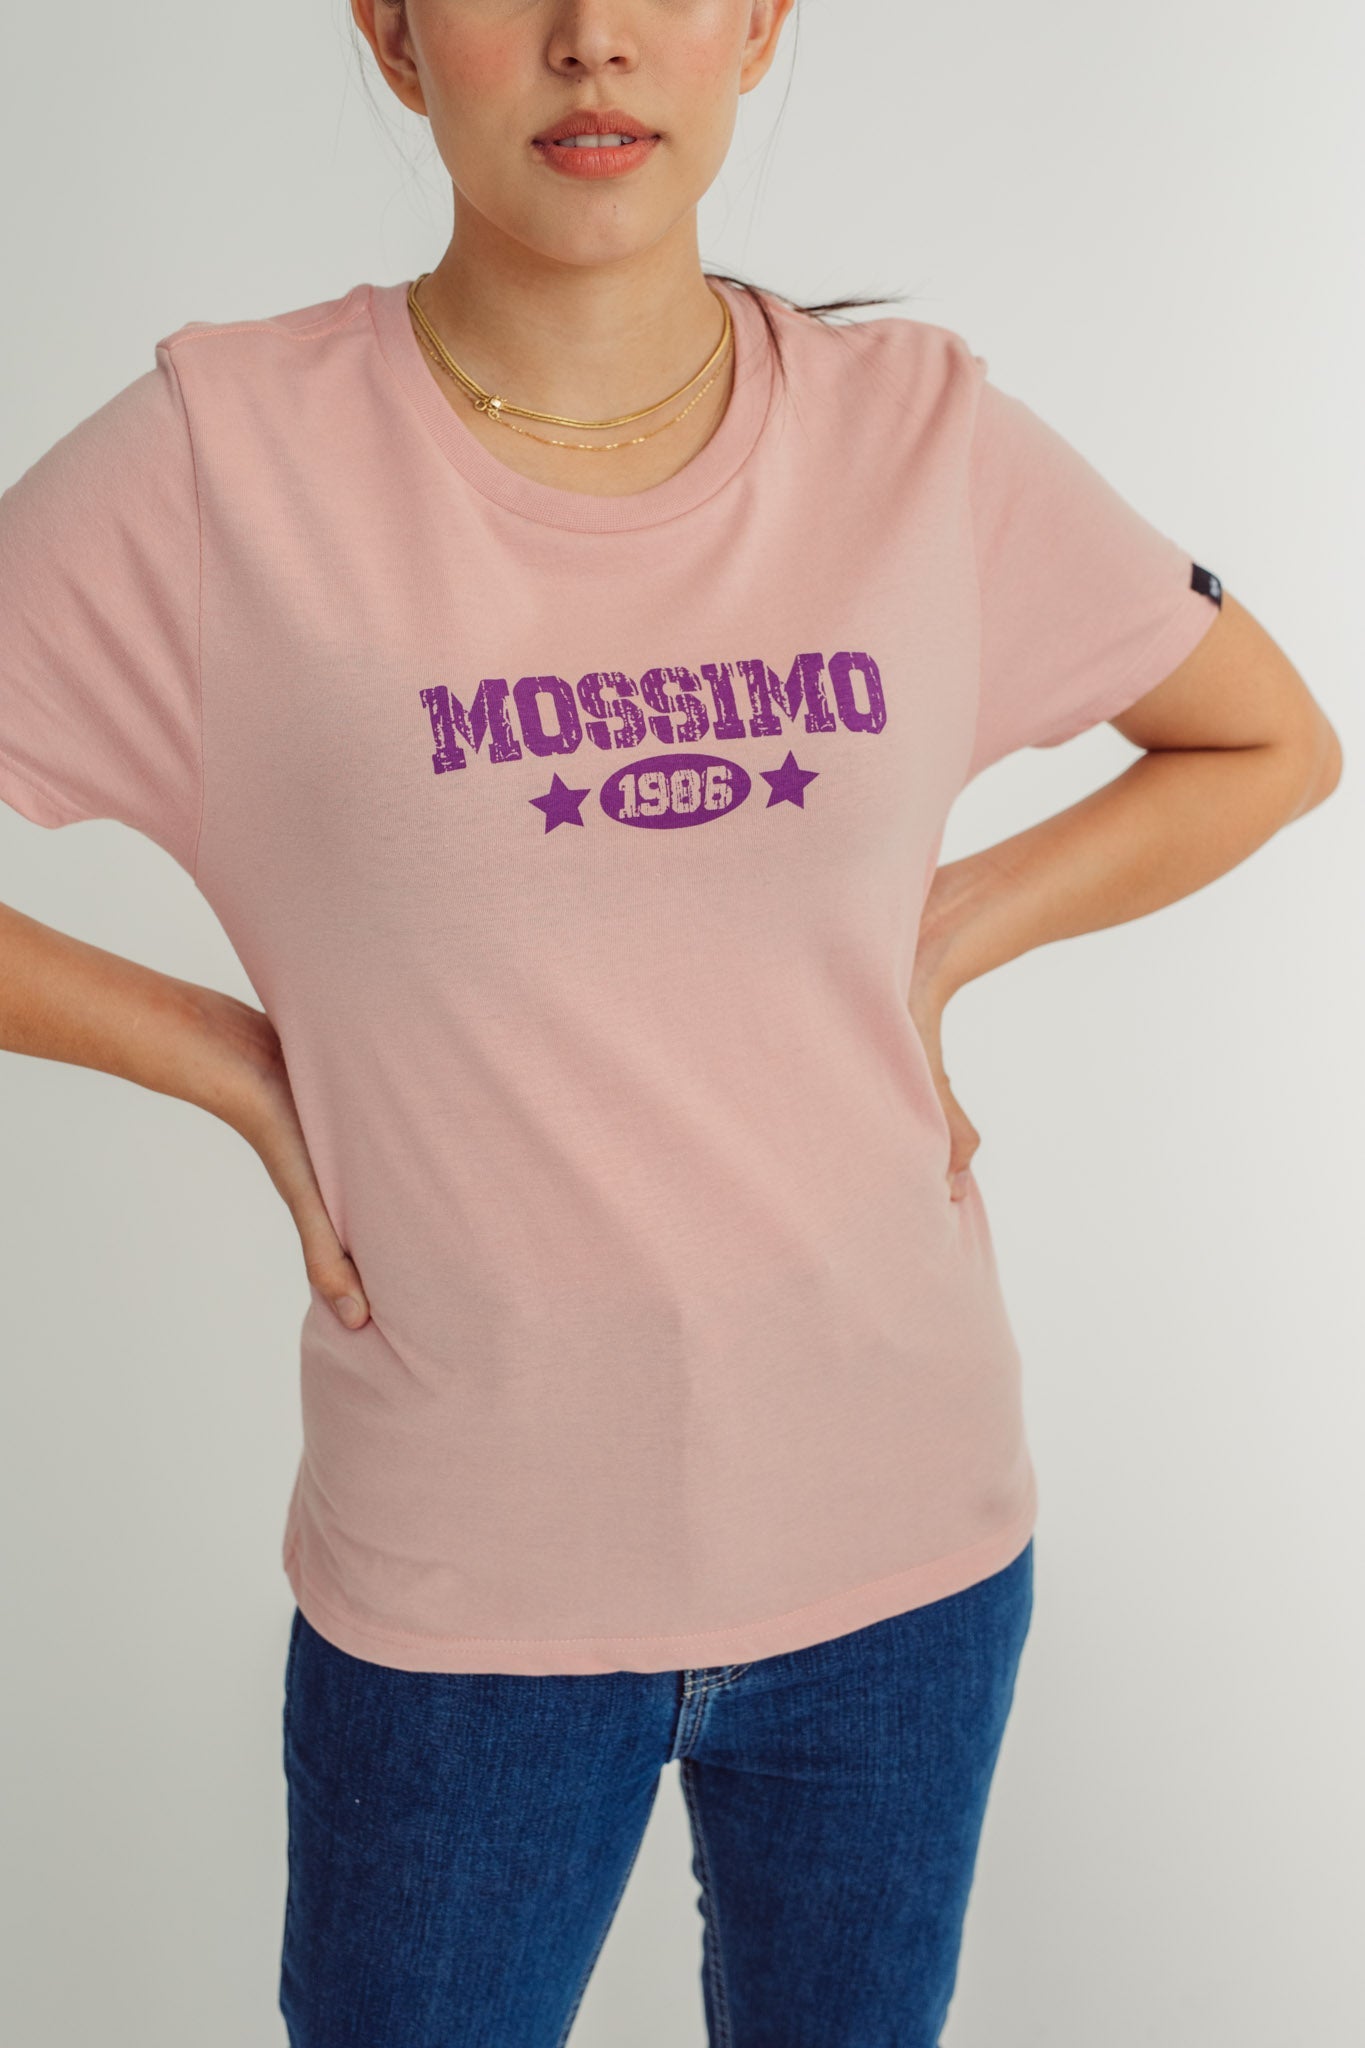 Silver Pink Mossimo 1986 Big Branding Classic Fit Tee - Mossimo PH